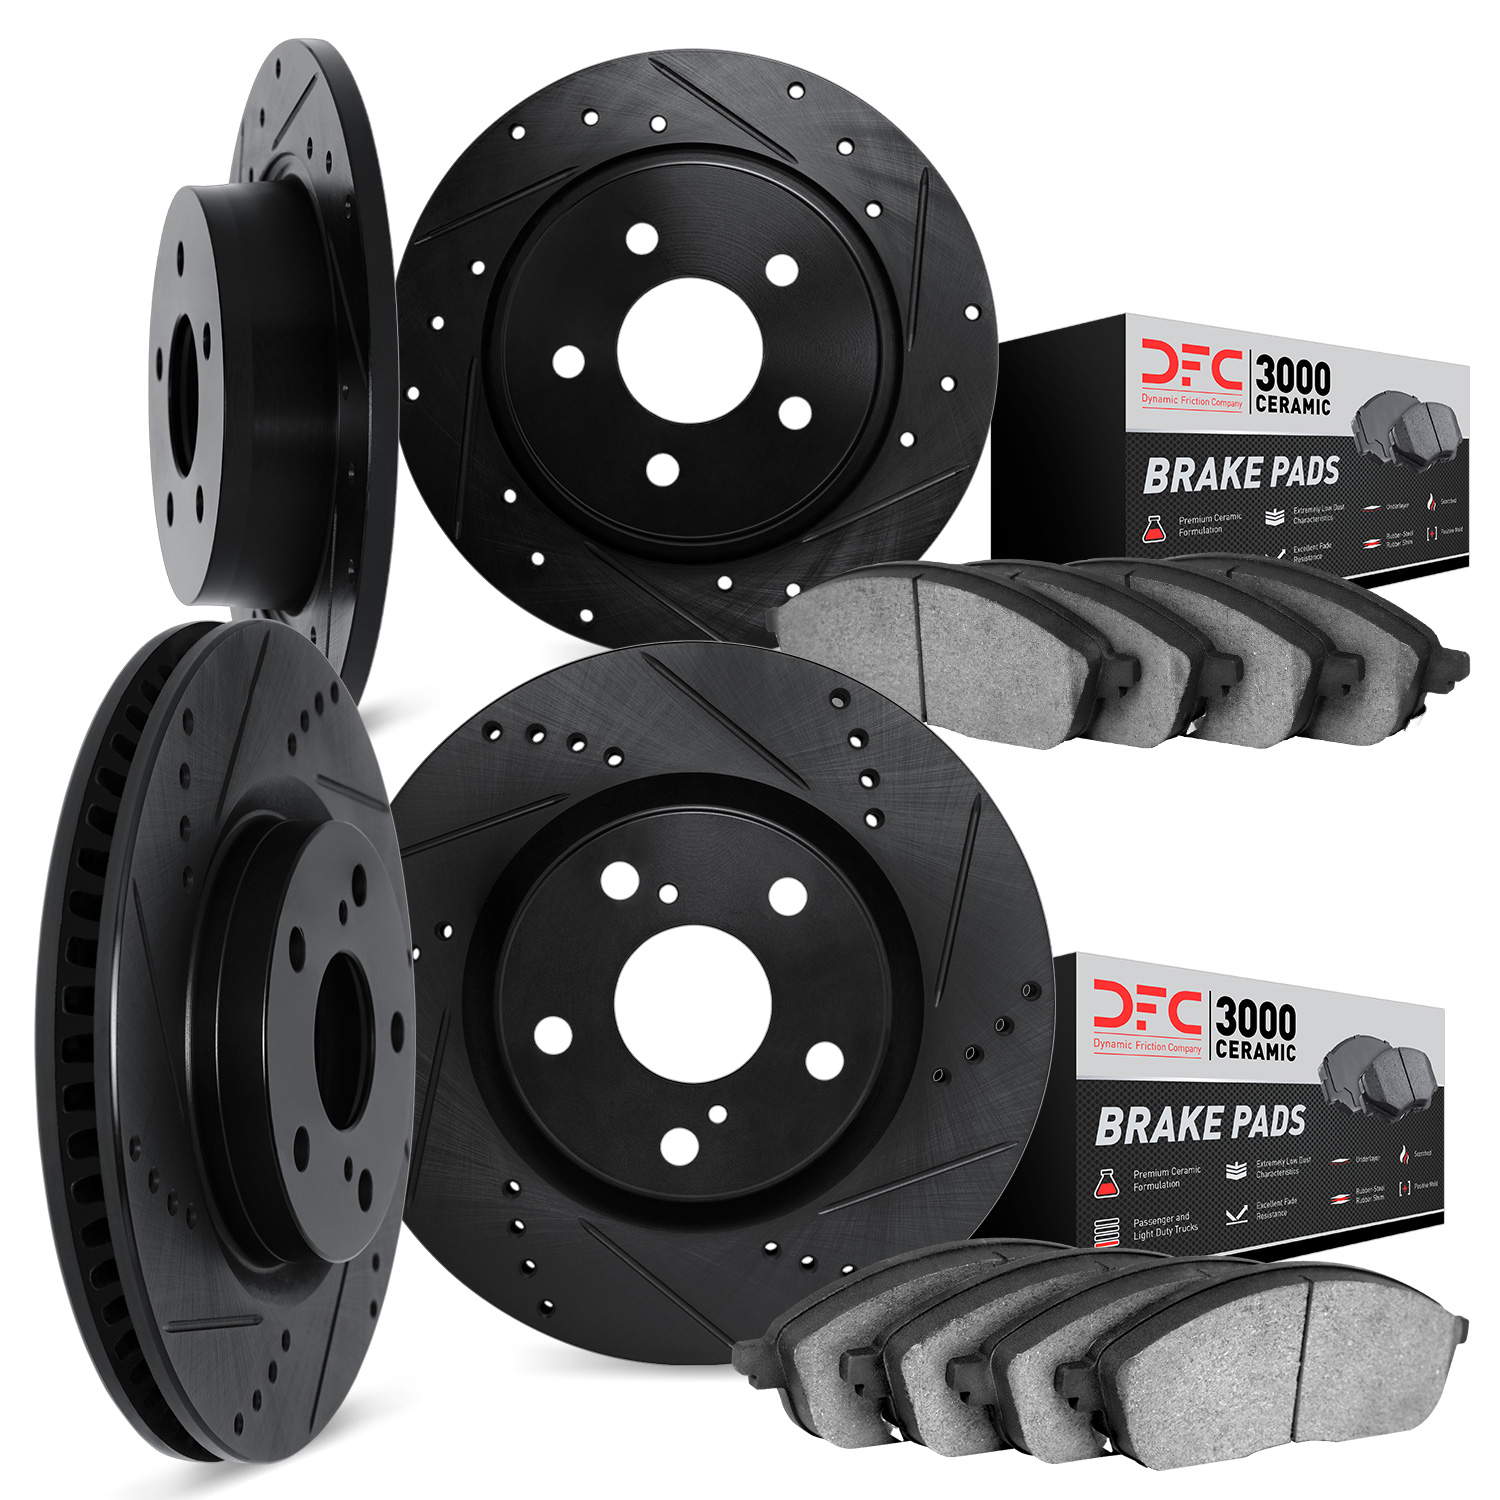 8304-39030 Drilled/Slotted Brake Rotors with 3000-Series Ceramic Brake Pads Kit [Black], 2016-2017 Mopar, Position: Front and Re